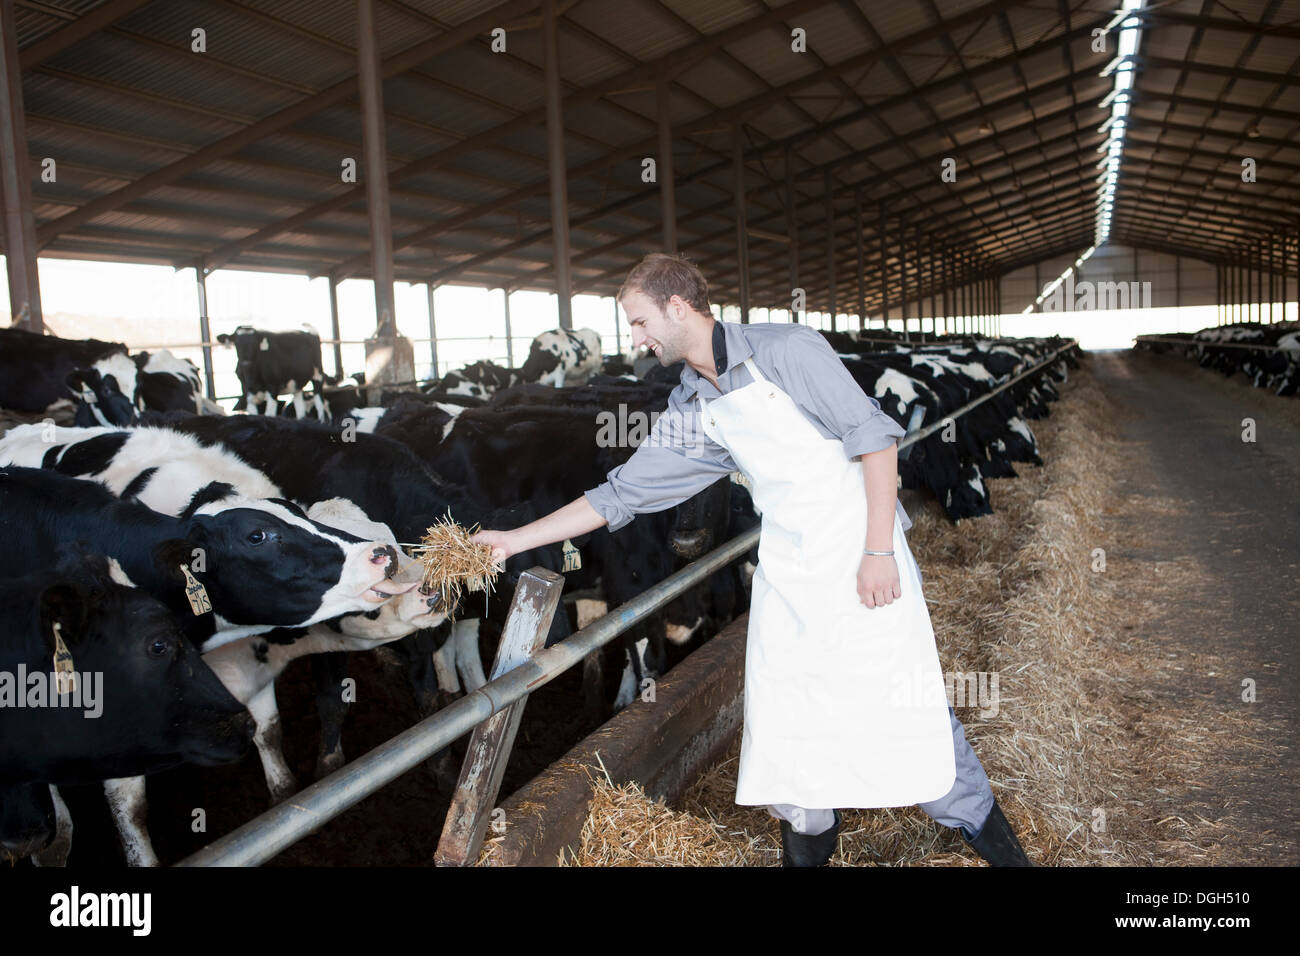 Worker feeding cows at dairy farm Stock Photo